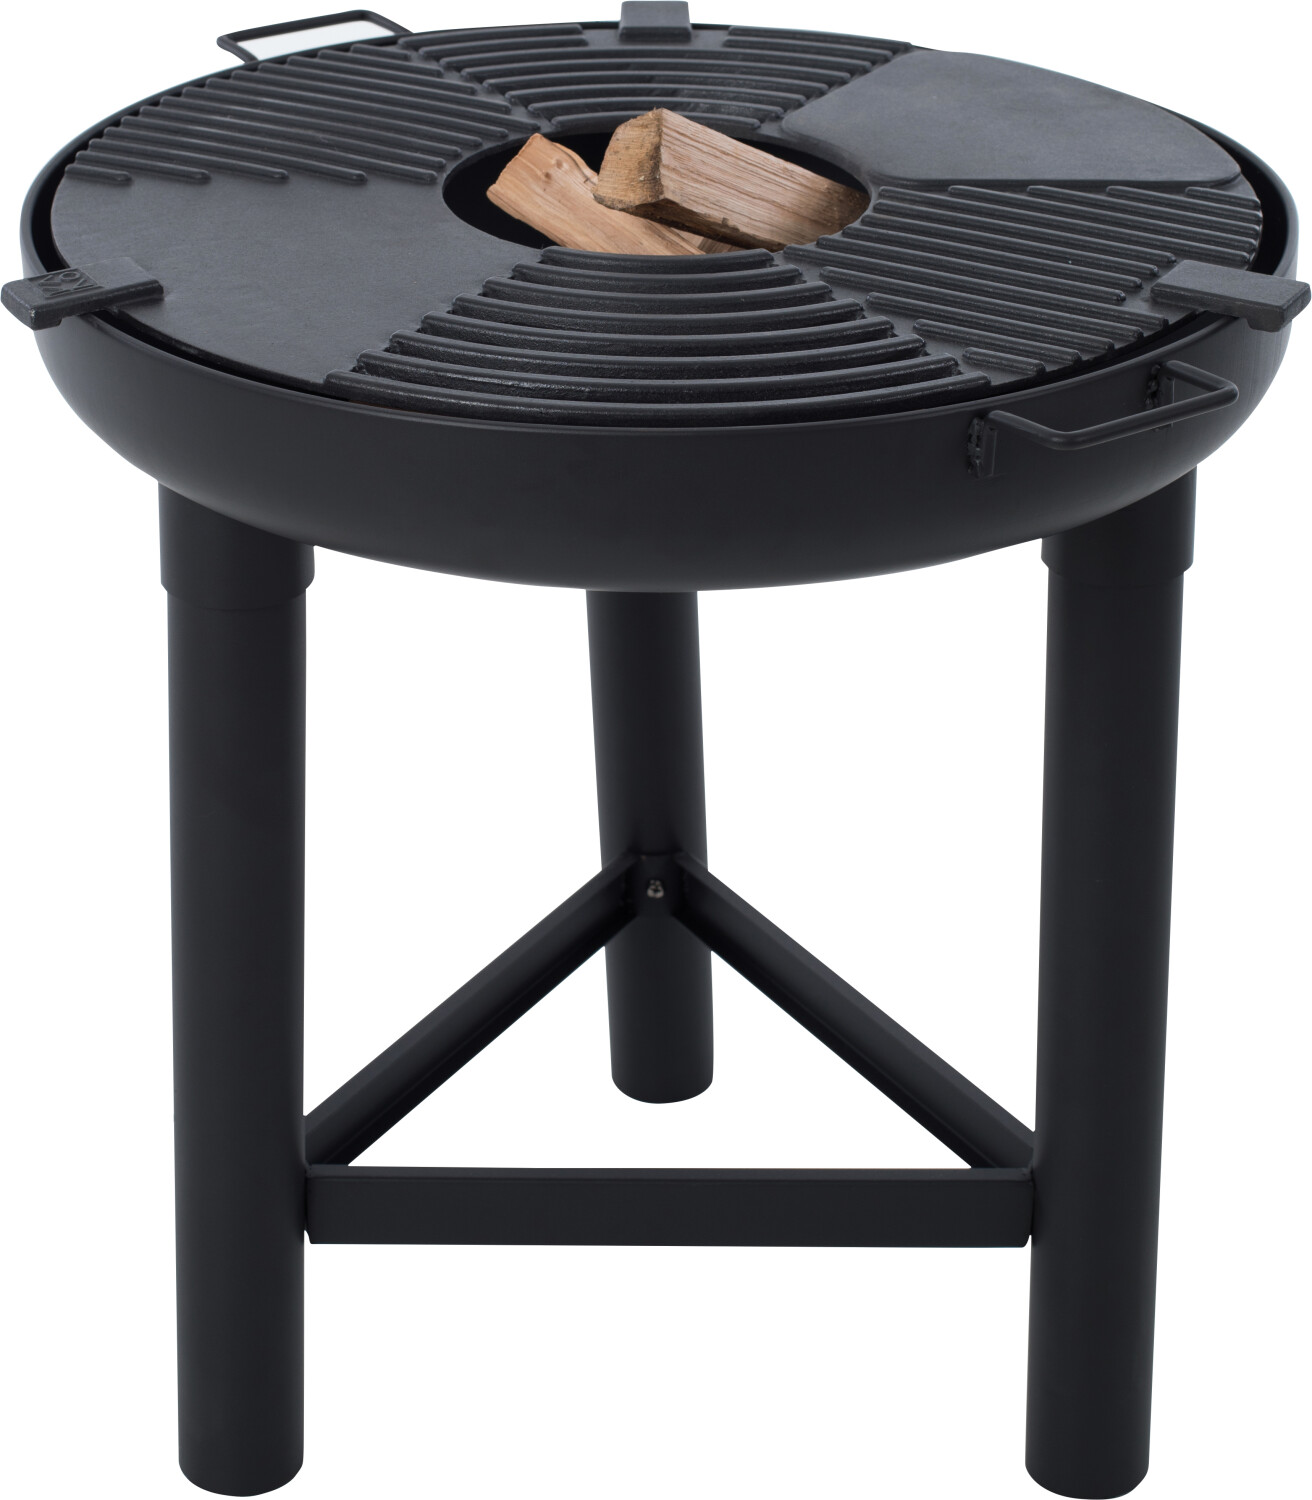 Afbeelding Bbgrill Bbq Plancha Grill - Barbecue - 60x72x68 cm 14 kg Zwart door Tuinadvies.be